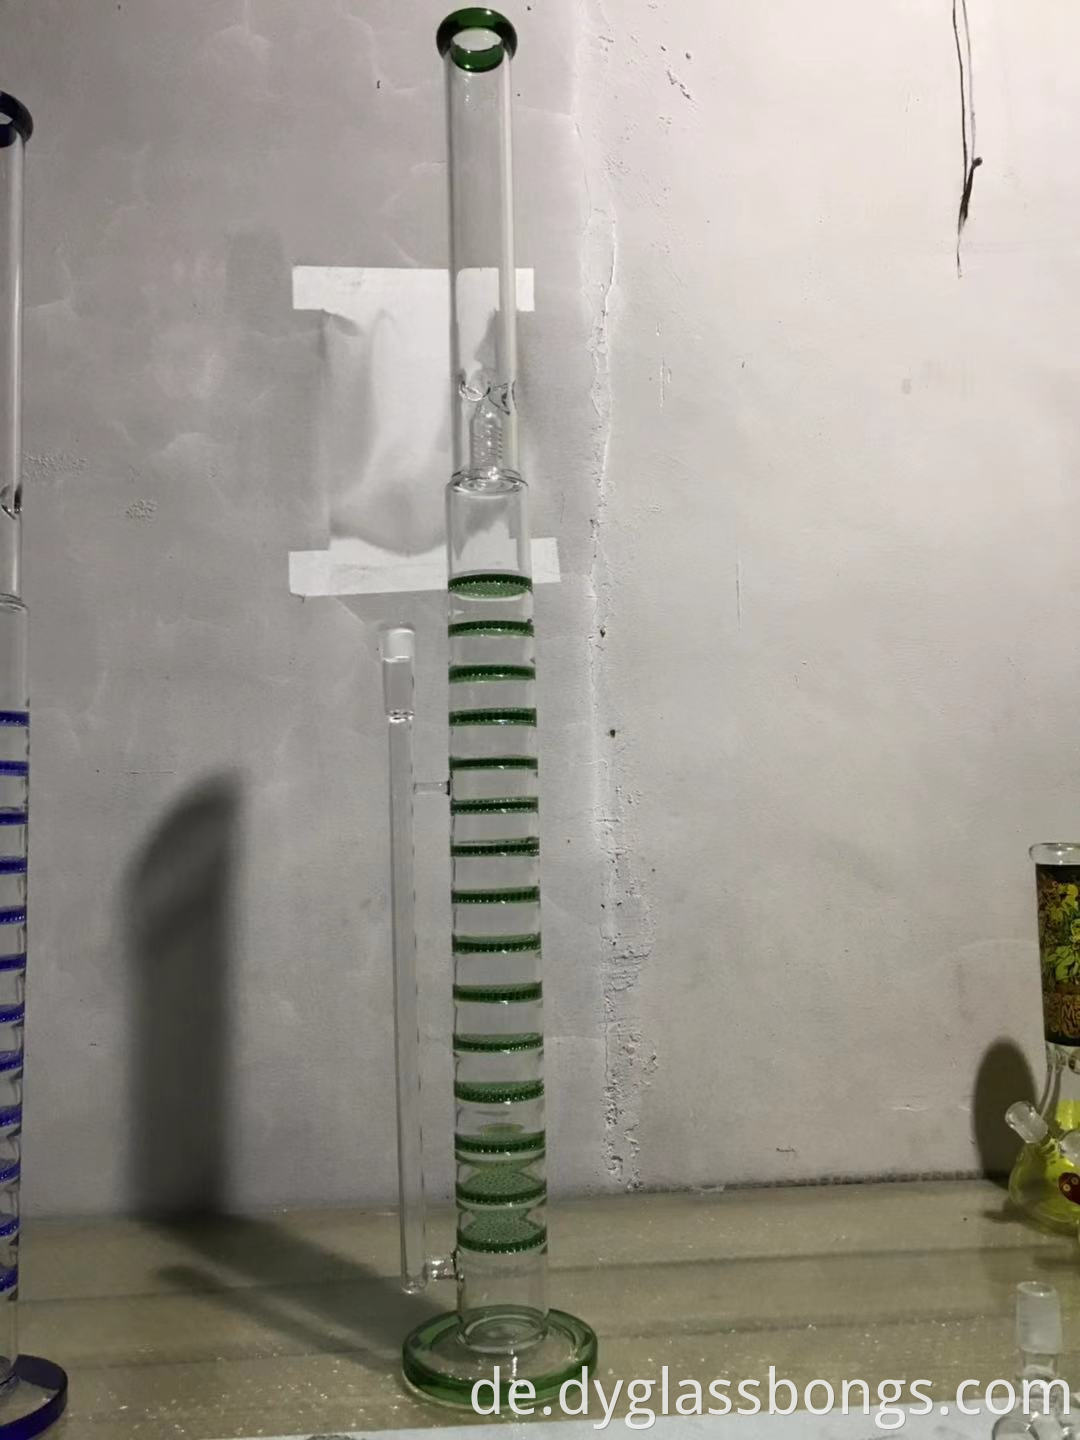 Honeycomb filter water pipe